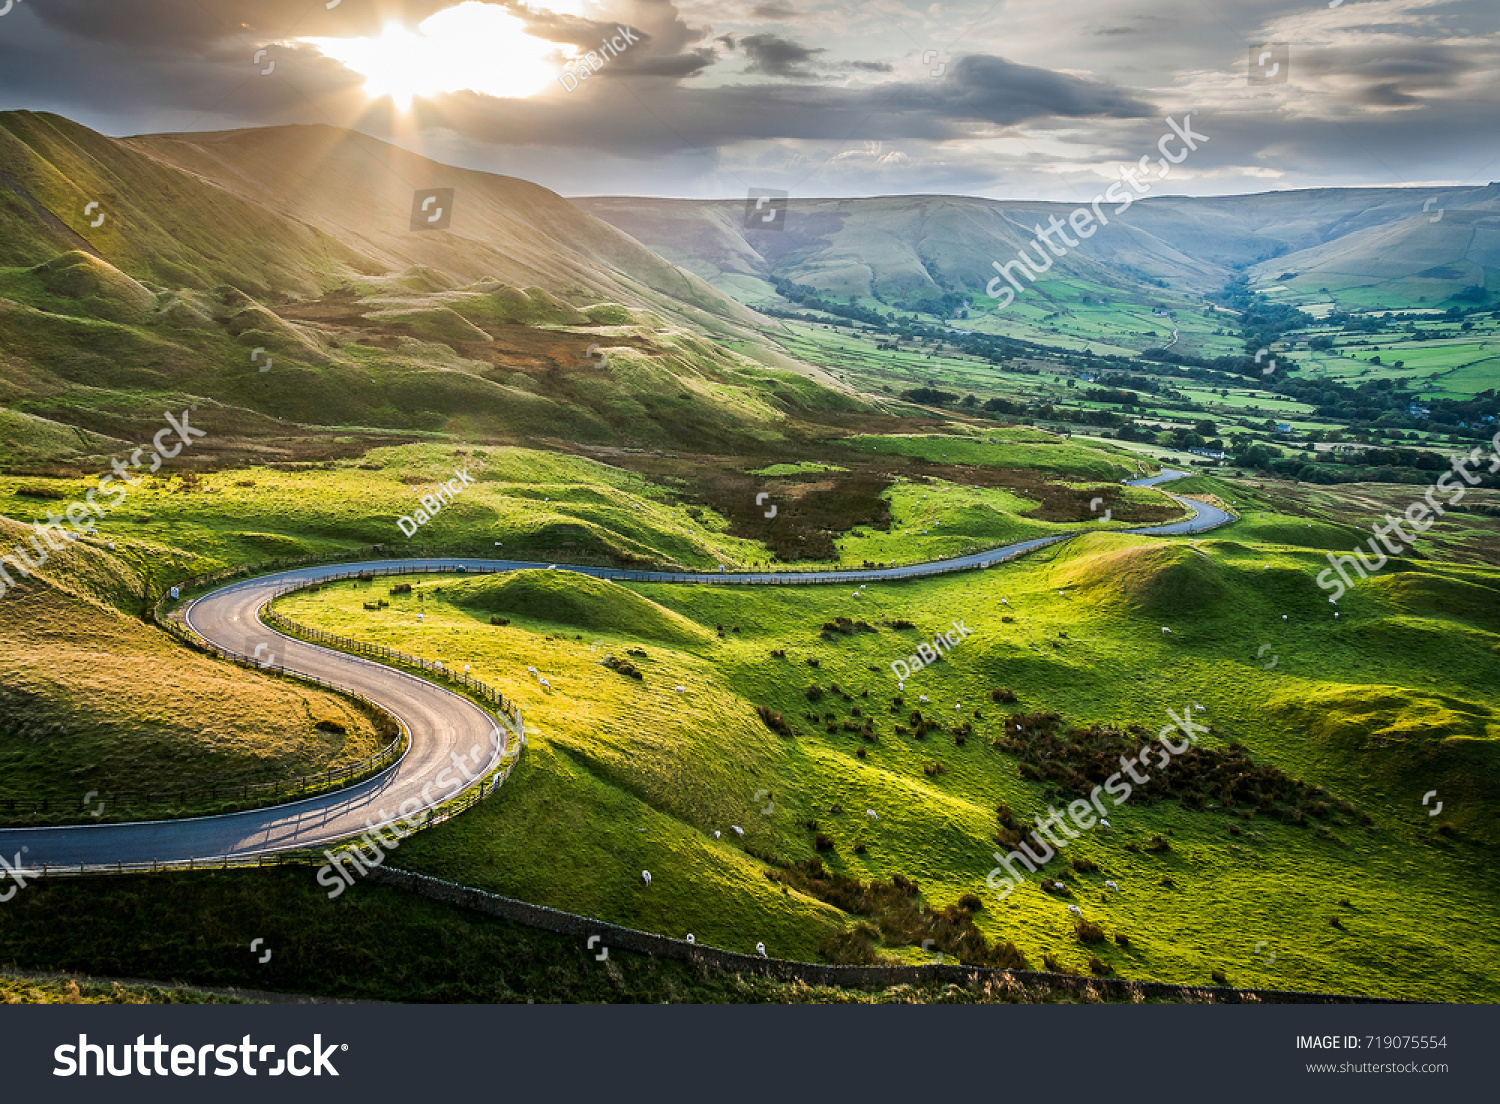 Sunset at Mam Tor, Peak District National Park, with a view along the winding road among the green hills down to Hope Valley, in Derbyshire, England. #719075554